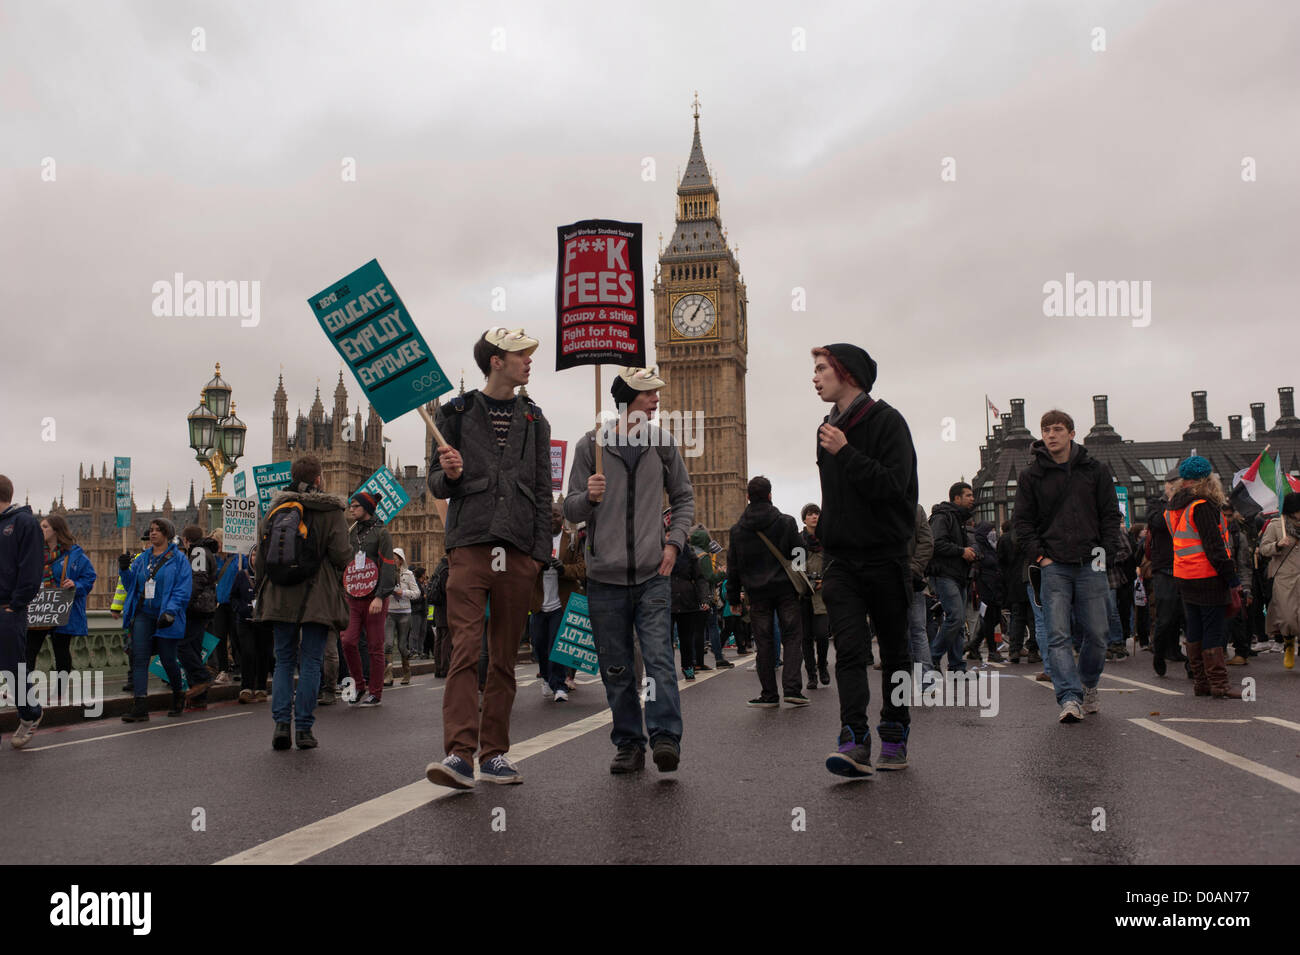 London, UK - 21 November 2012: thousand of students take part in a march organised by the National Union of Students from Temple Place to Kennington Park to protest against tuition fees and unemployment.  © pcruciatti / Alamy  Live News Stock Photo